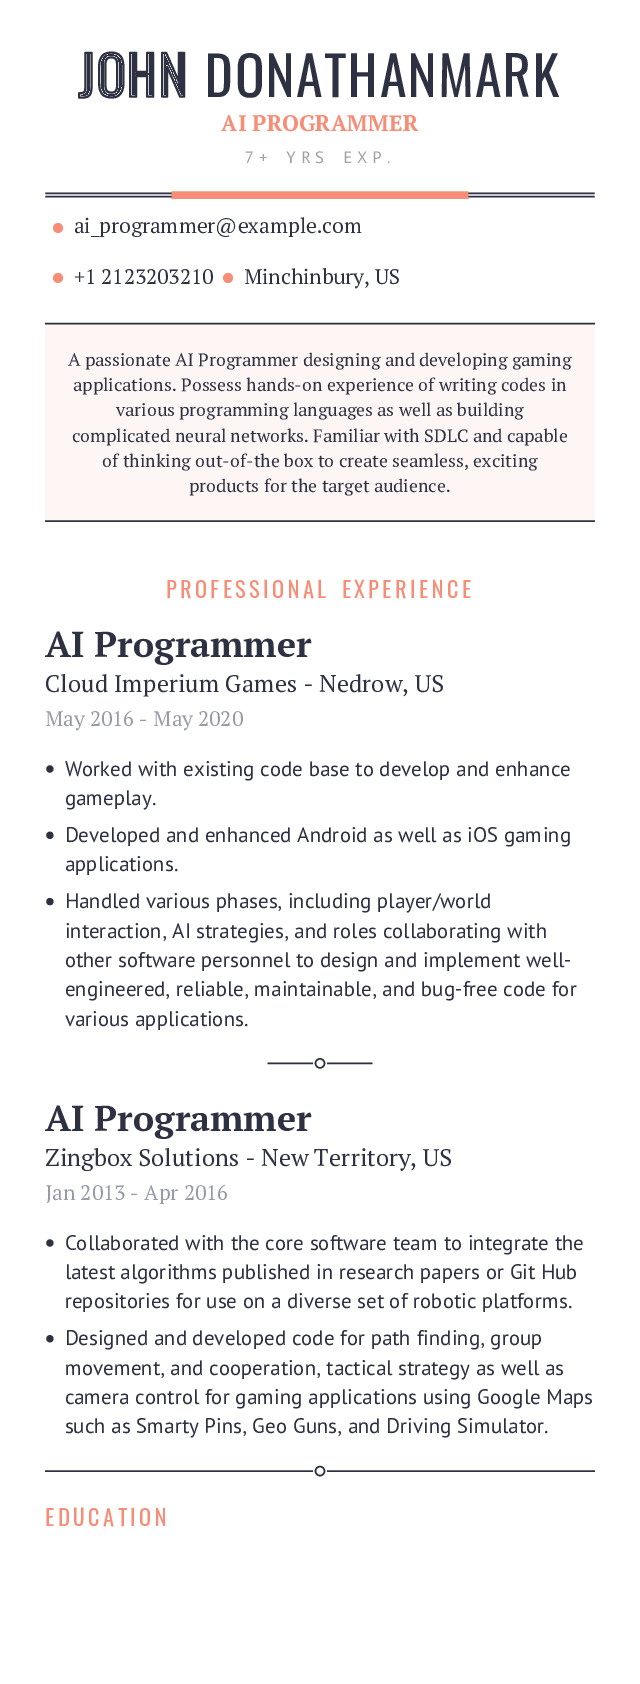 AI Programmer Mobile Resume Example